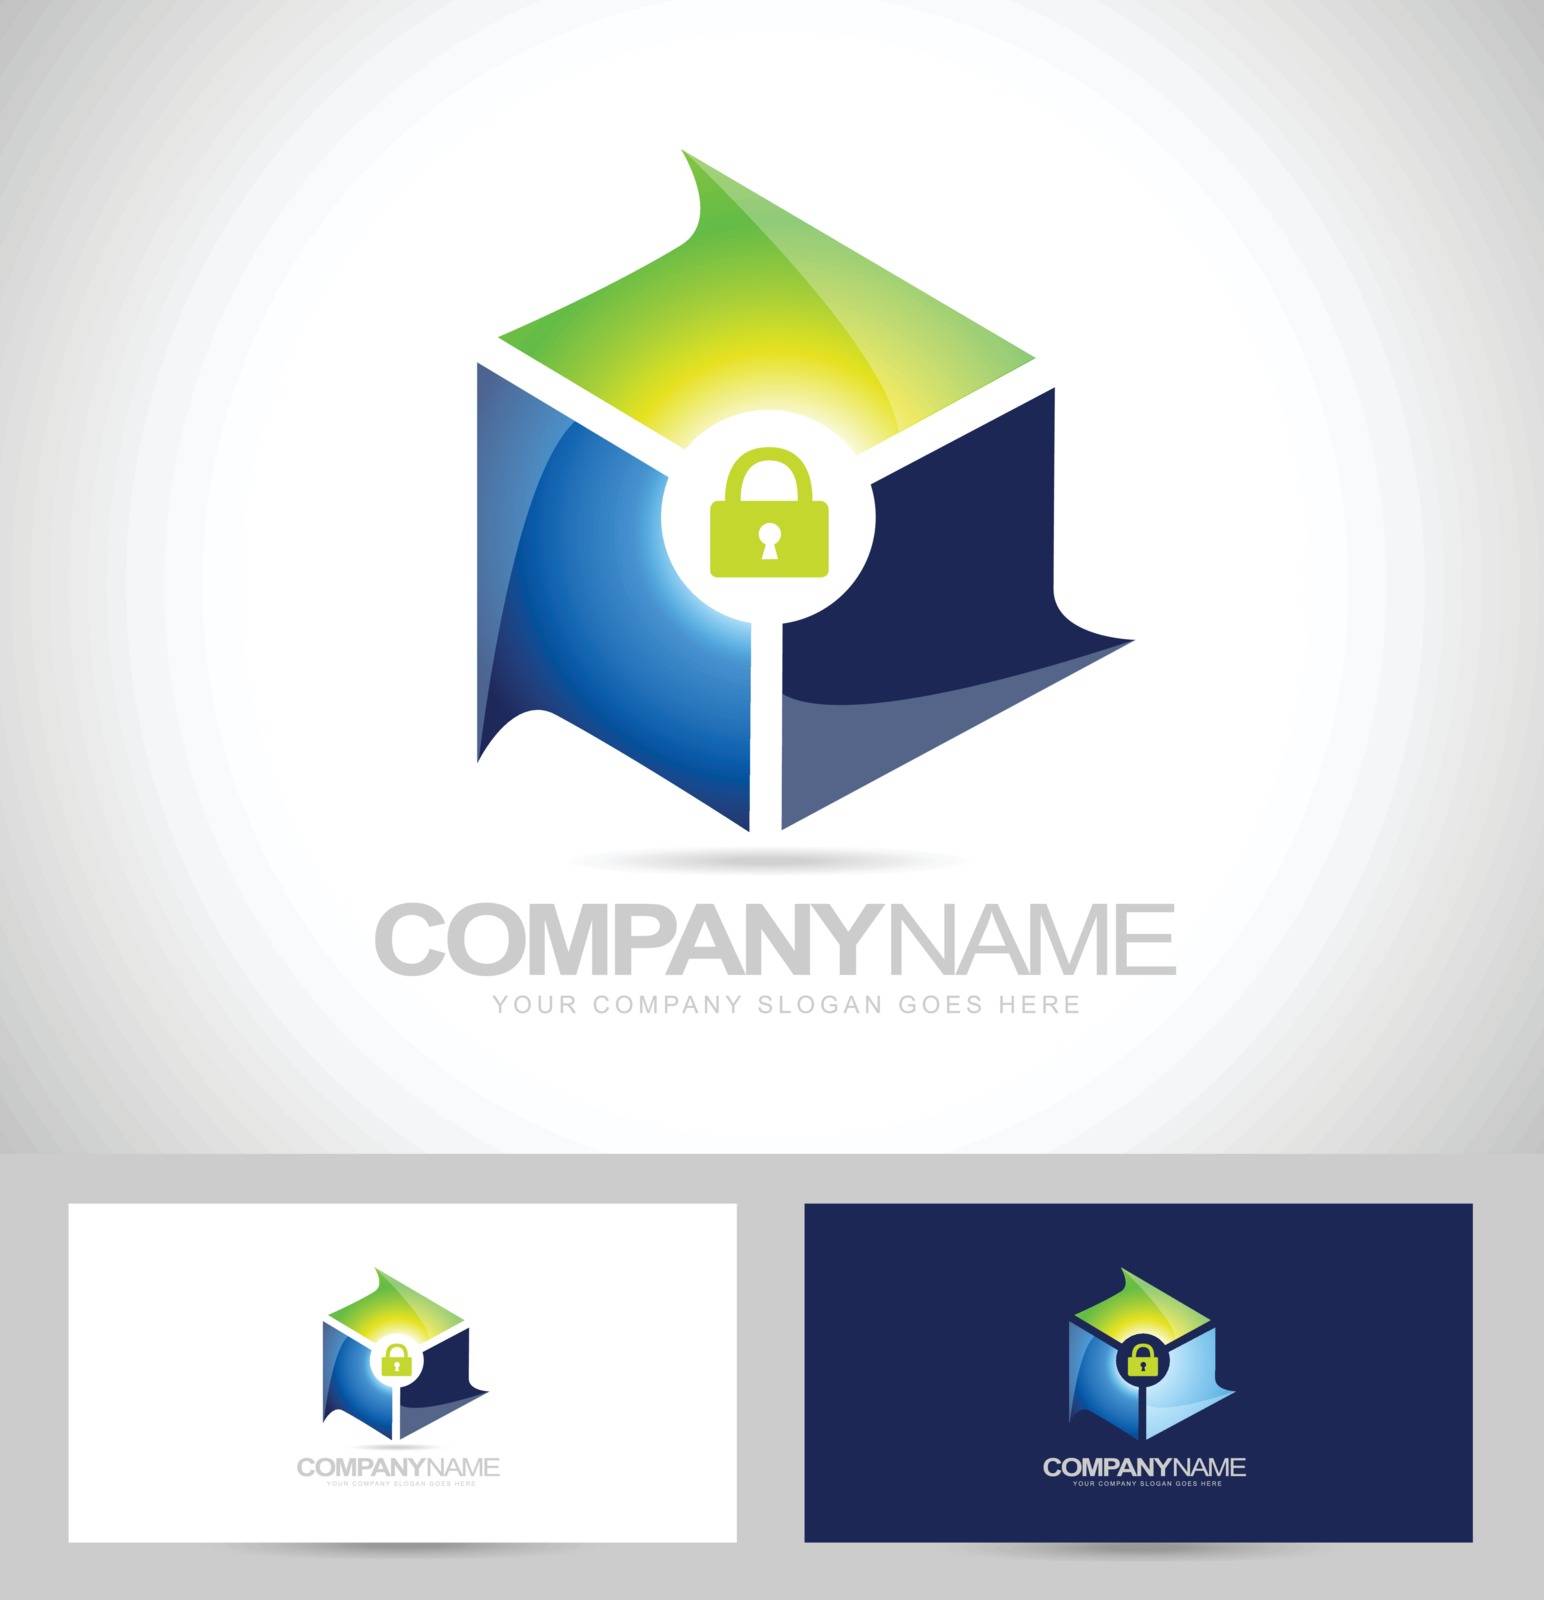 Secure Security Design. Data security Anti-Virus Icon design with business card template.